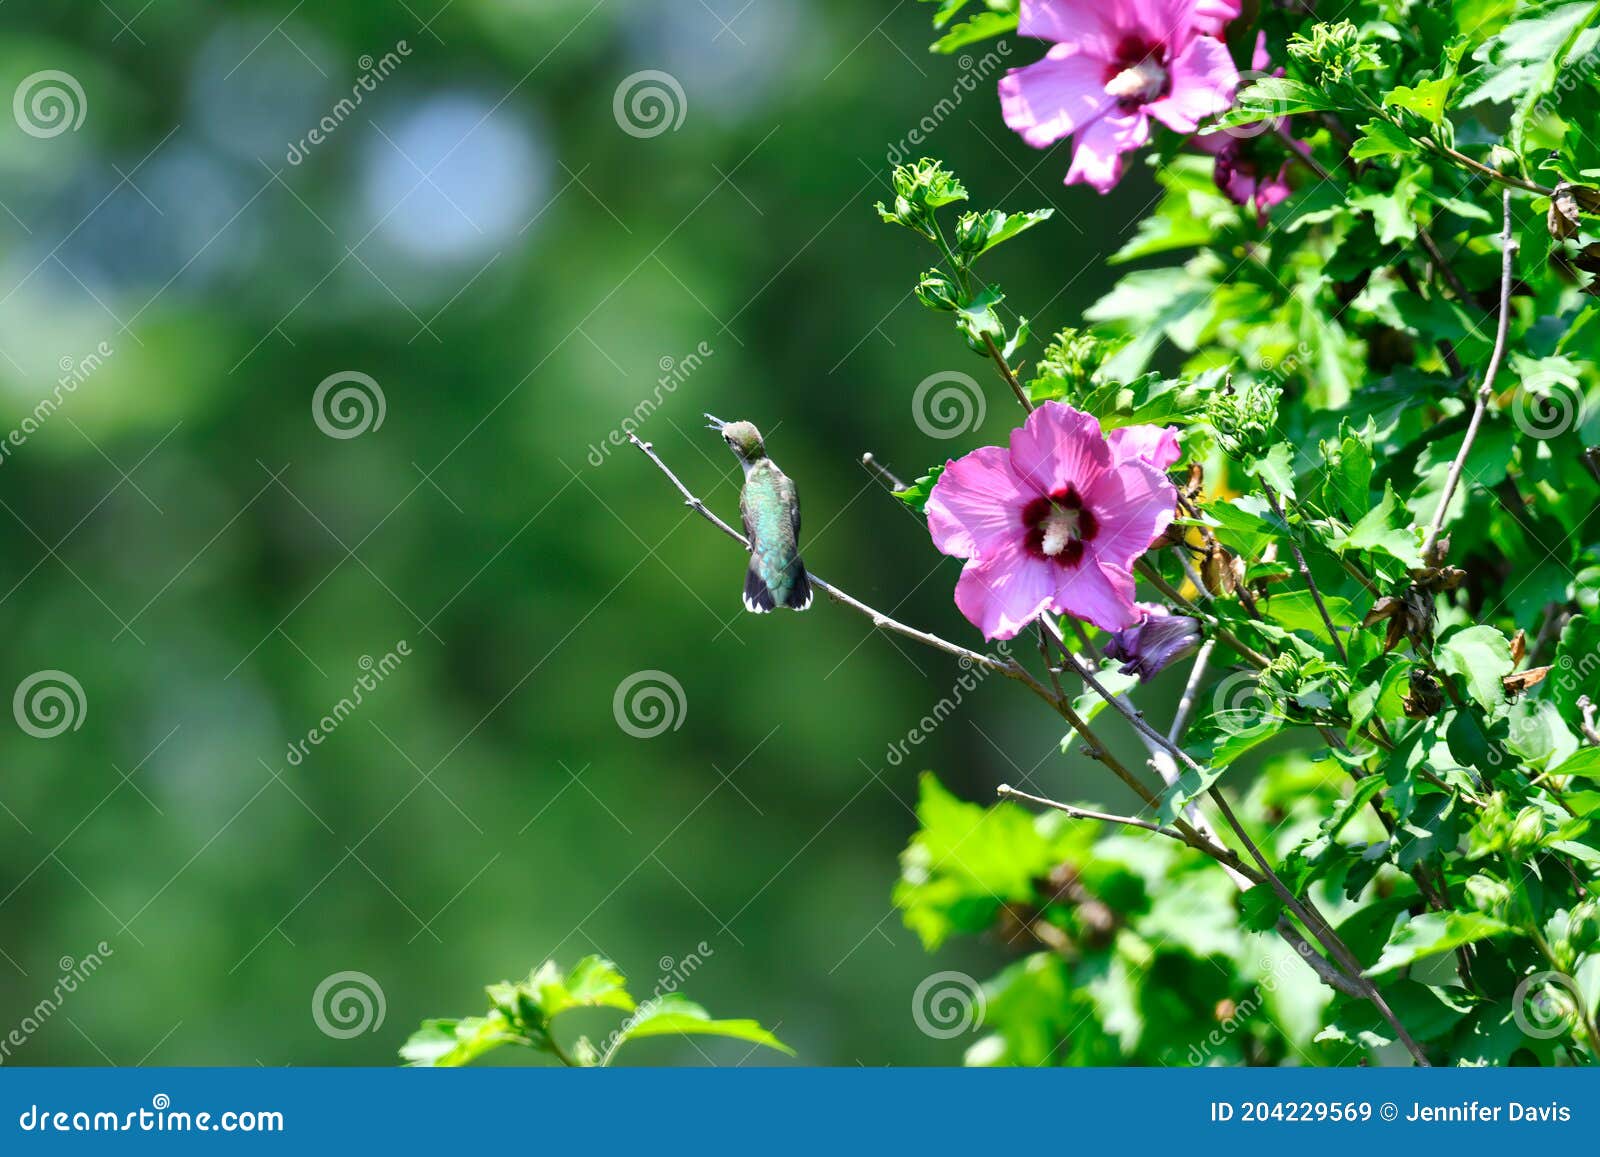 ruby-throated hummingbird perched on rose of sharon bush next to hibiscus flower